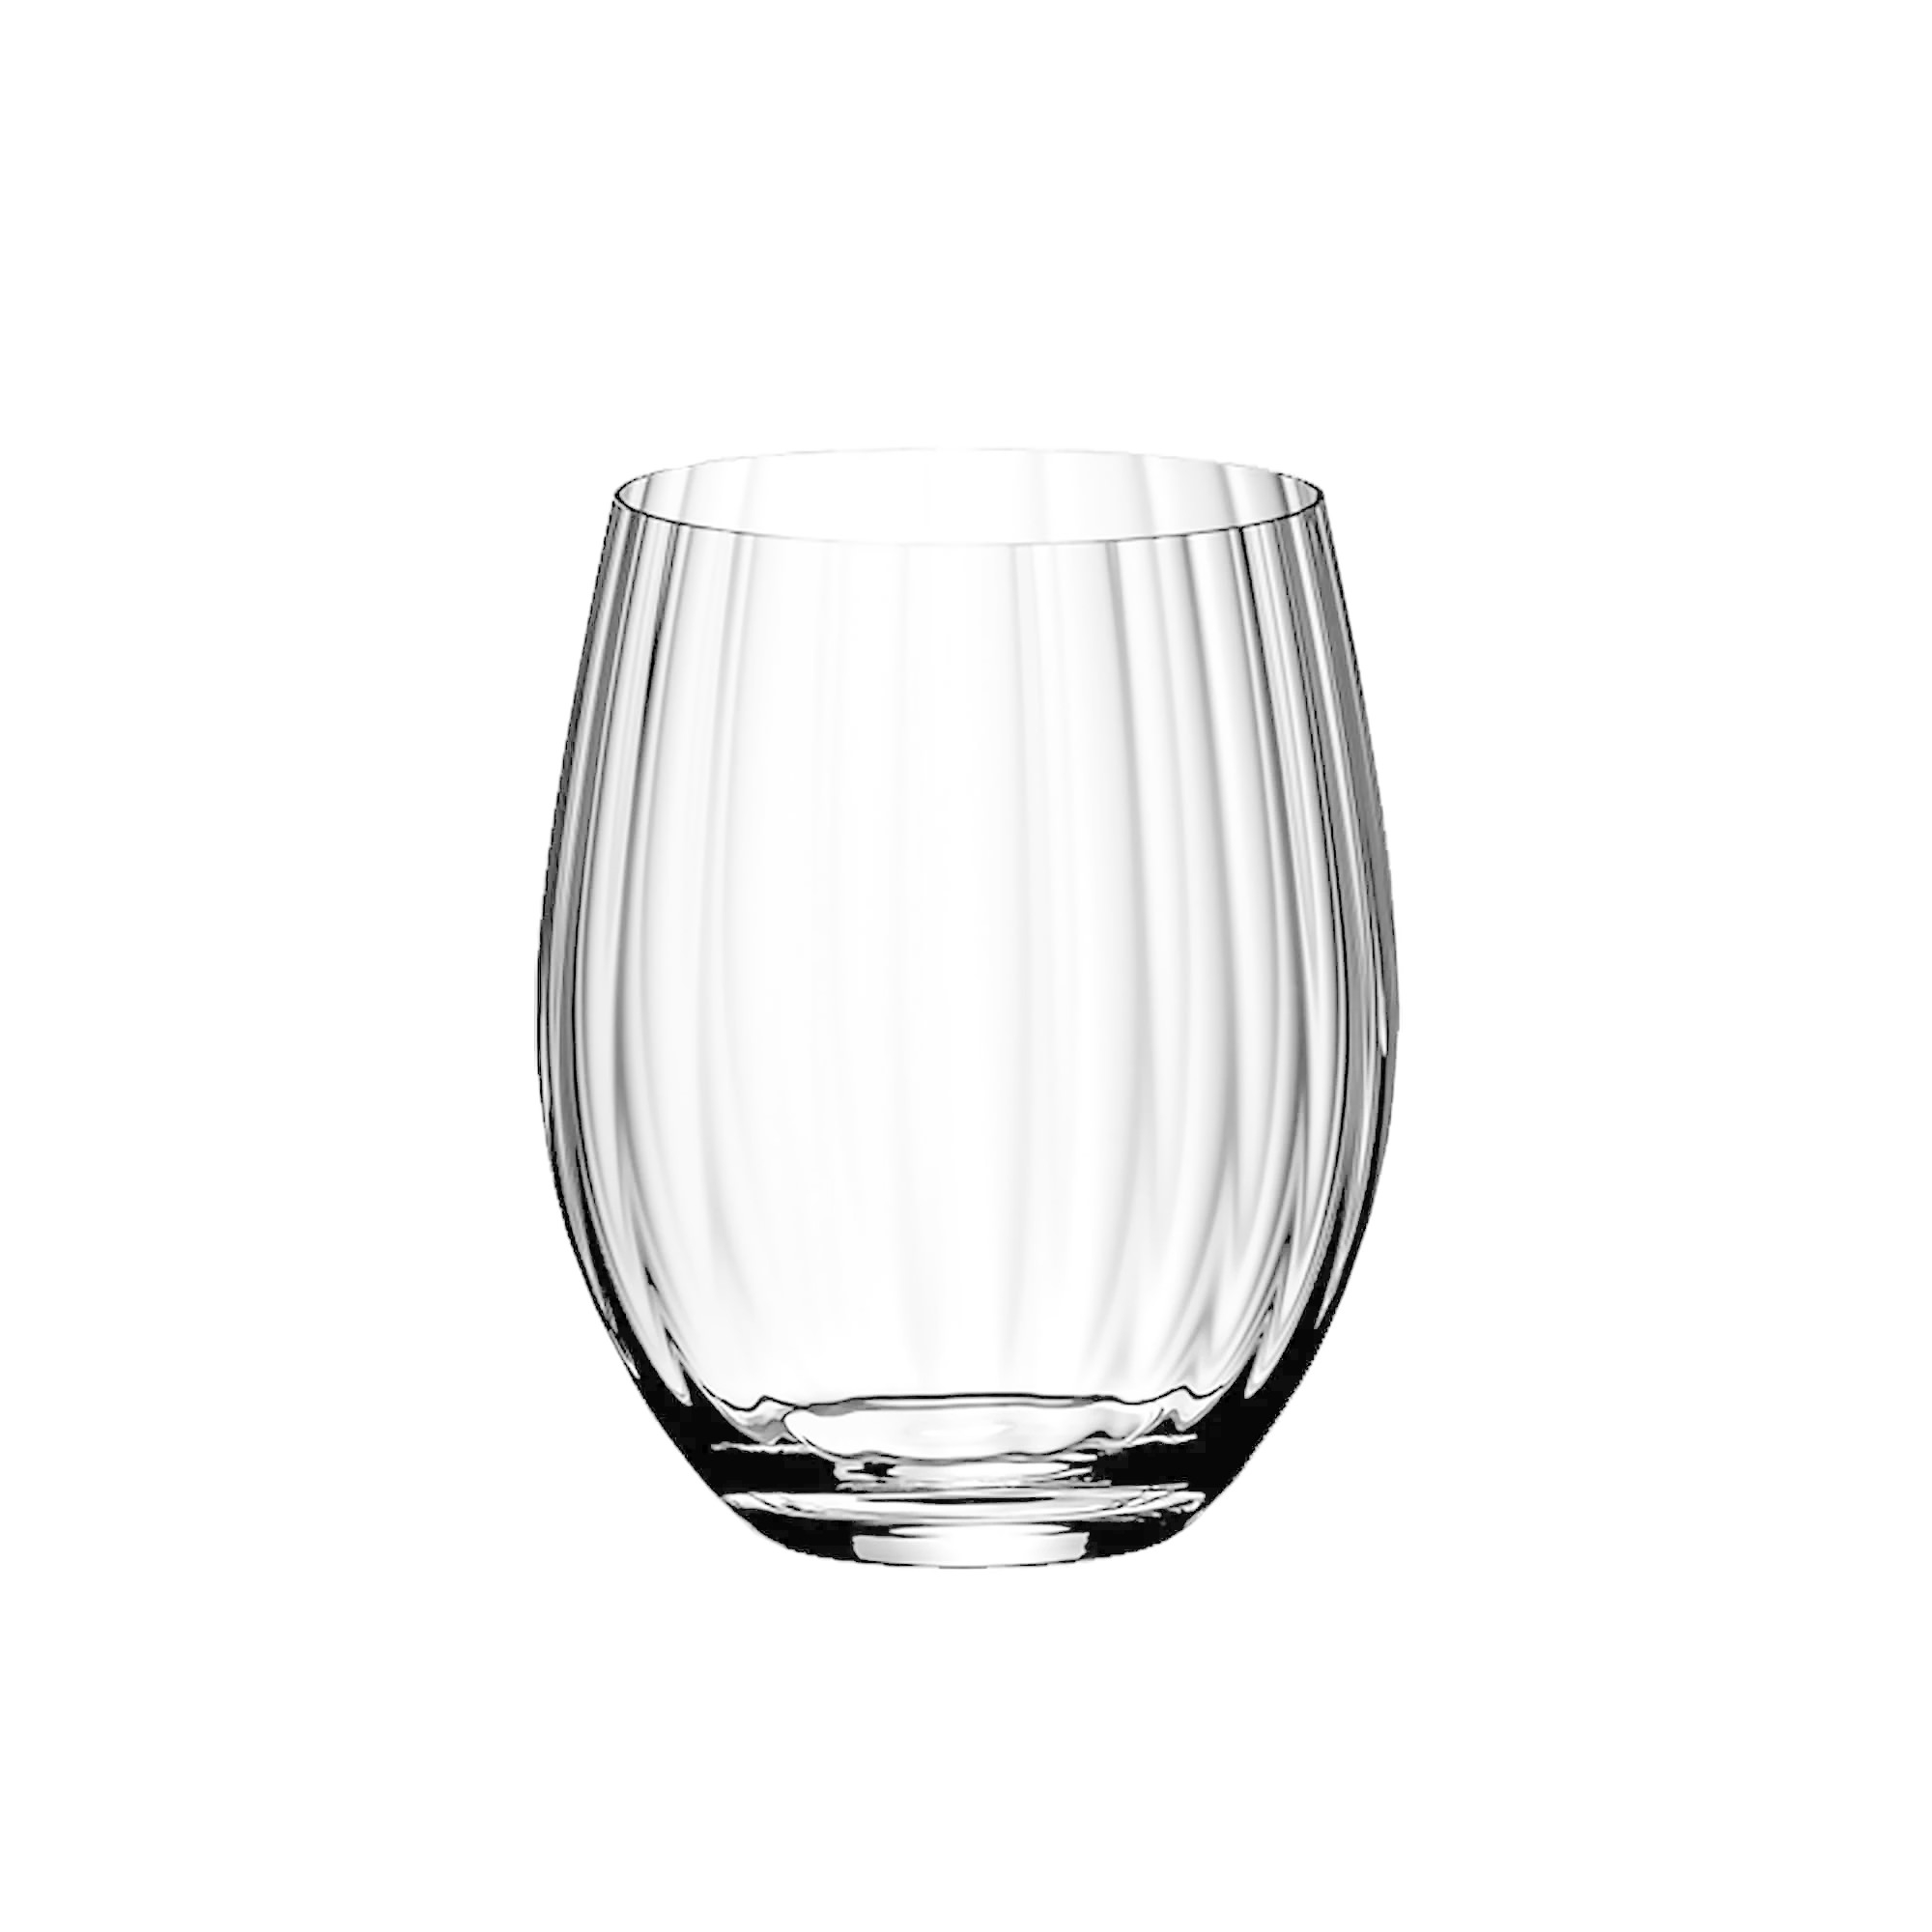 Riedel Mixing Tonic Glass 580ml Set of 4 Image 2